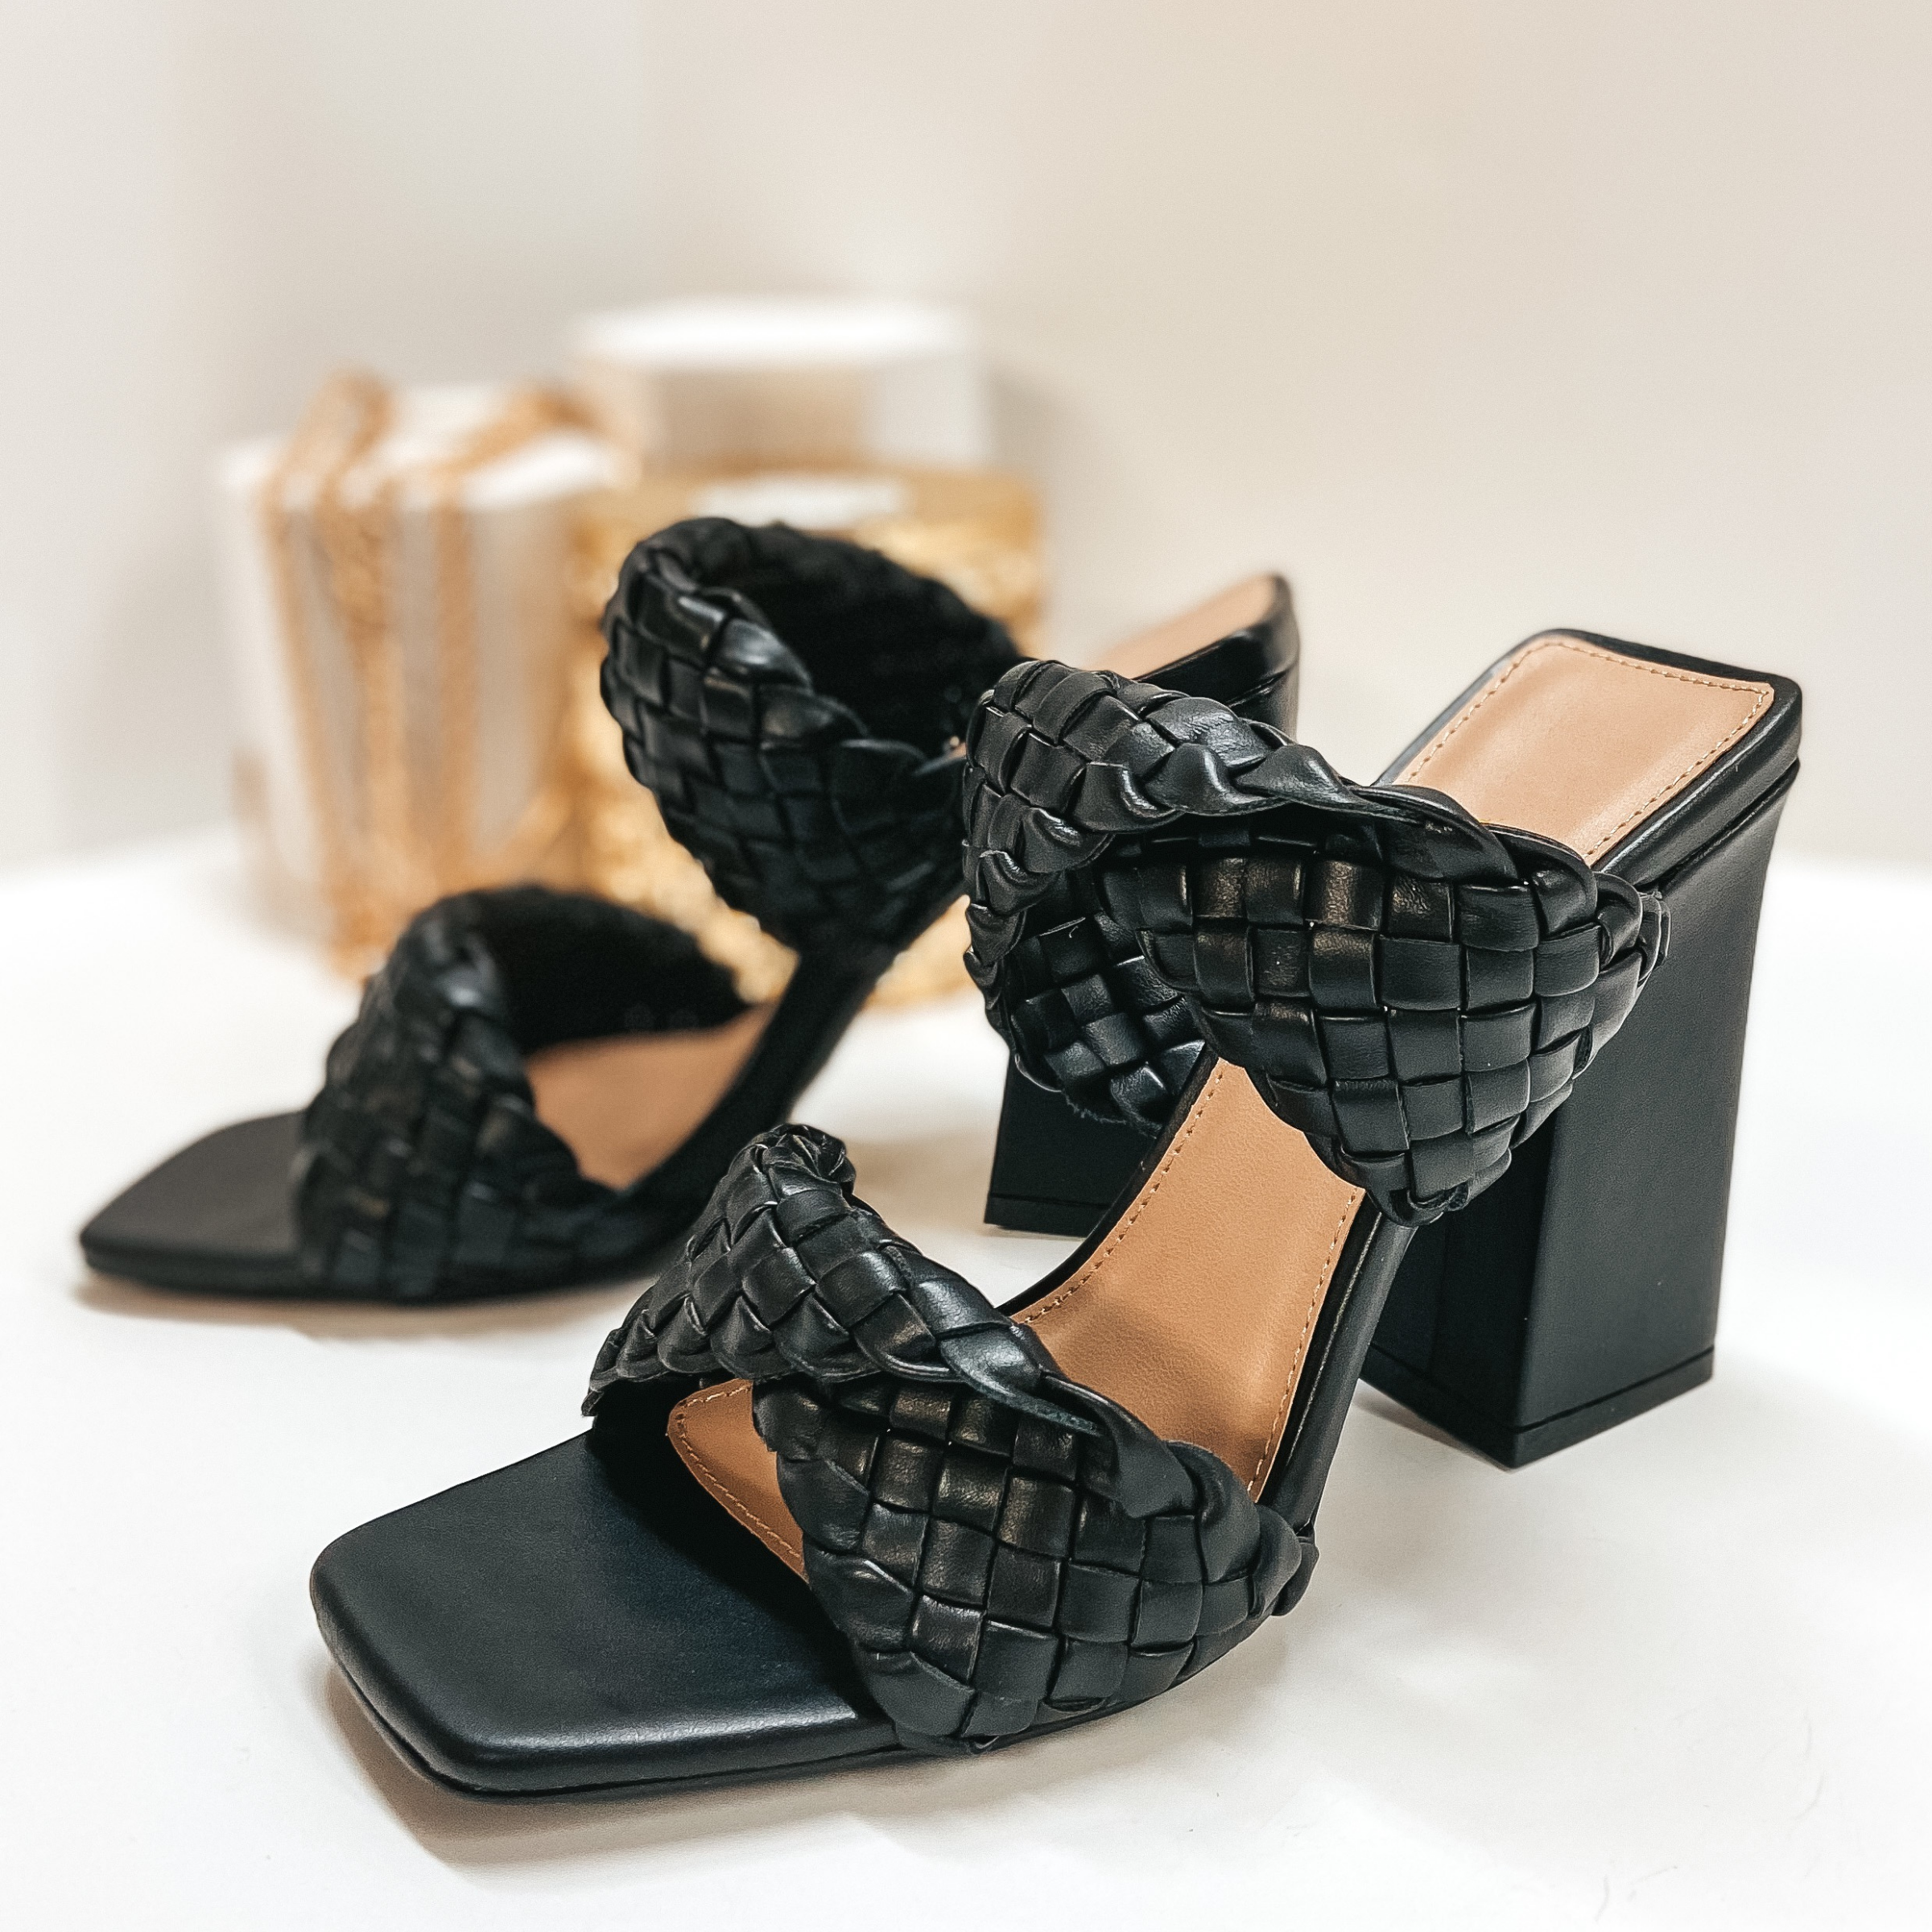 Giving Hope Braided Twist Block Heels in Black - Giddy Up Glamour Boutique